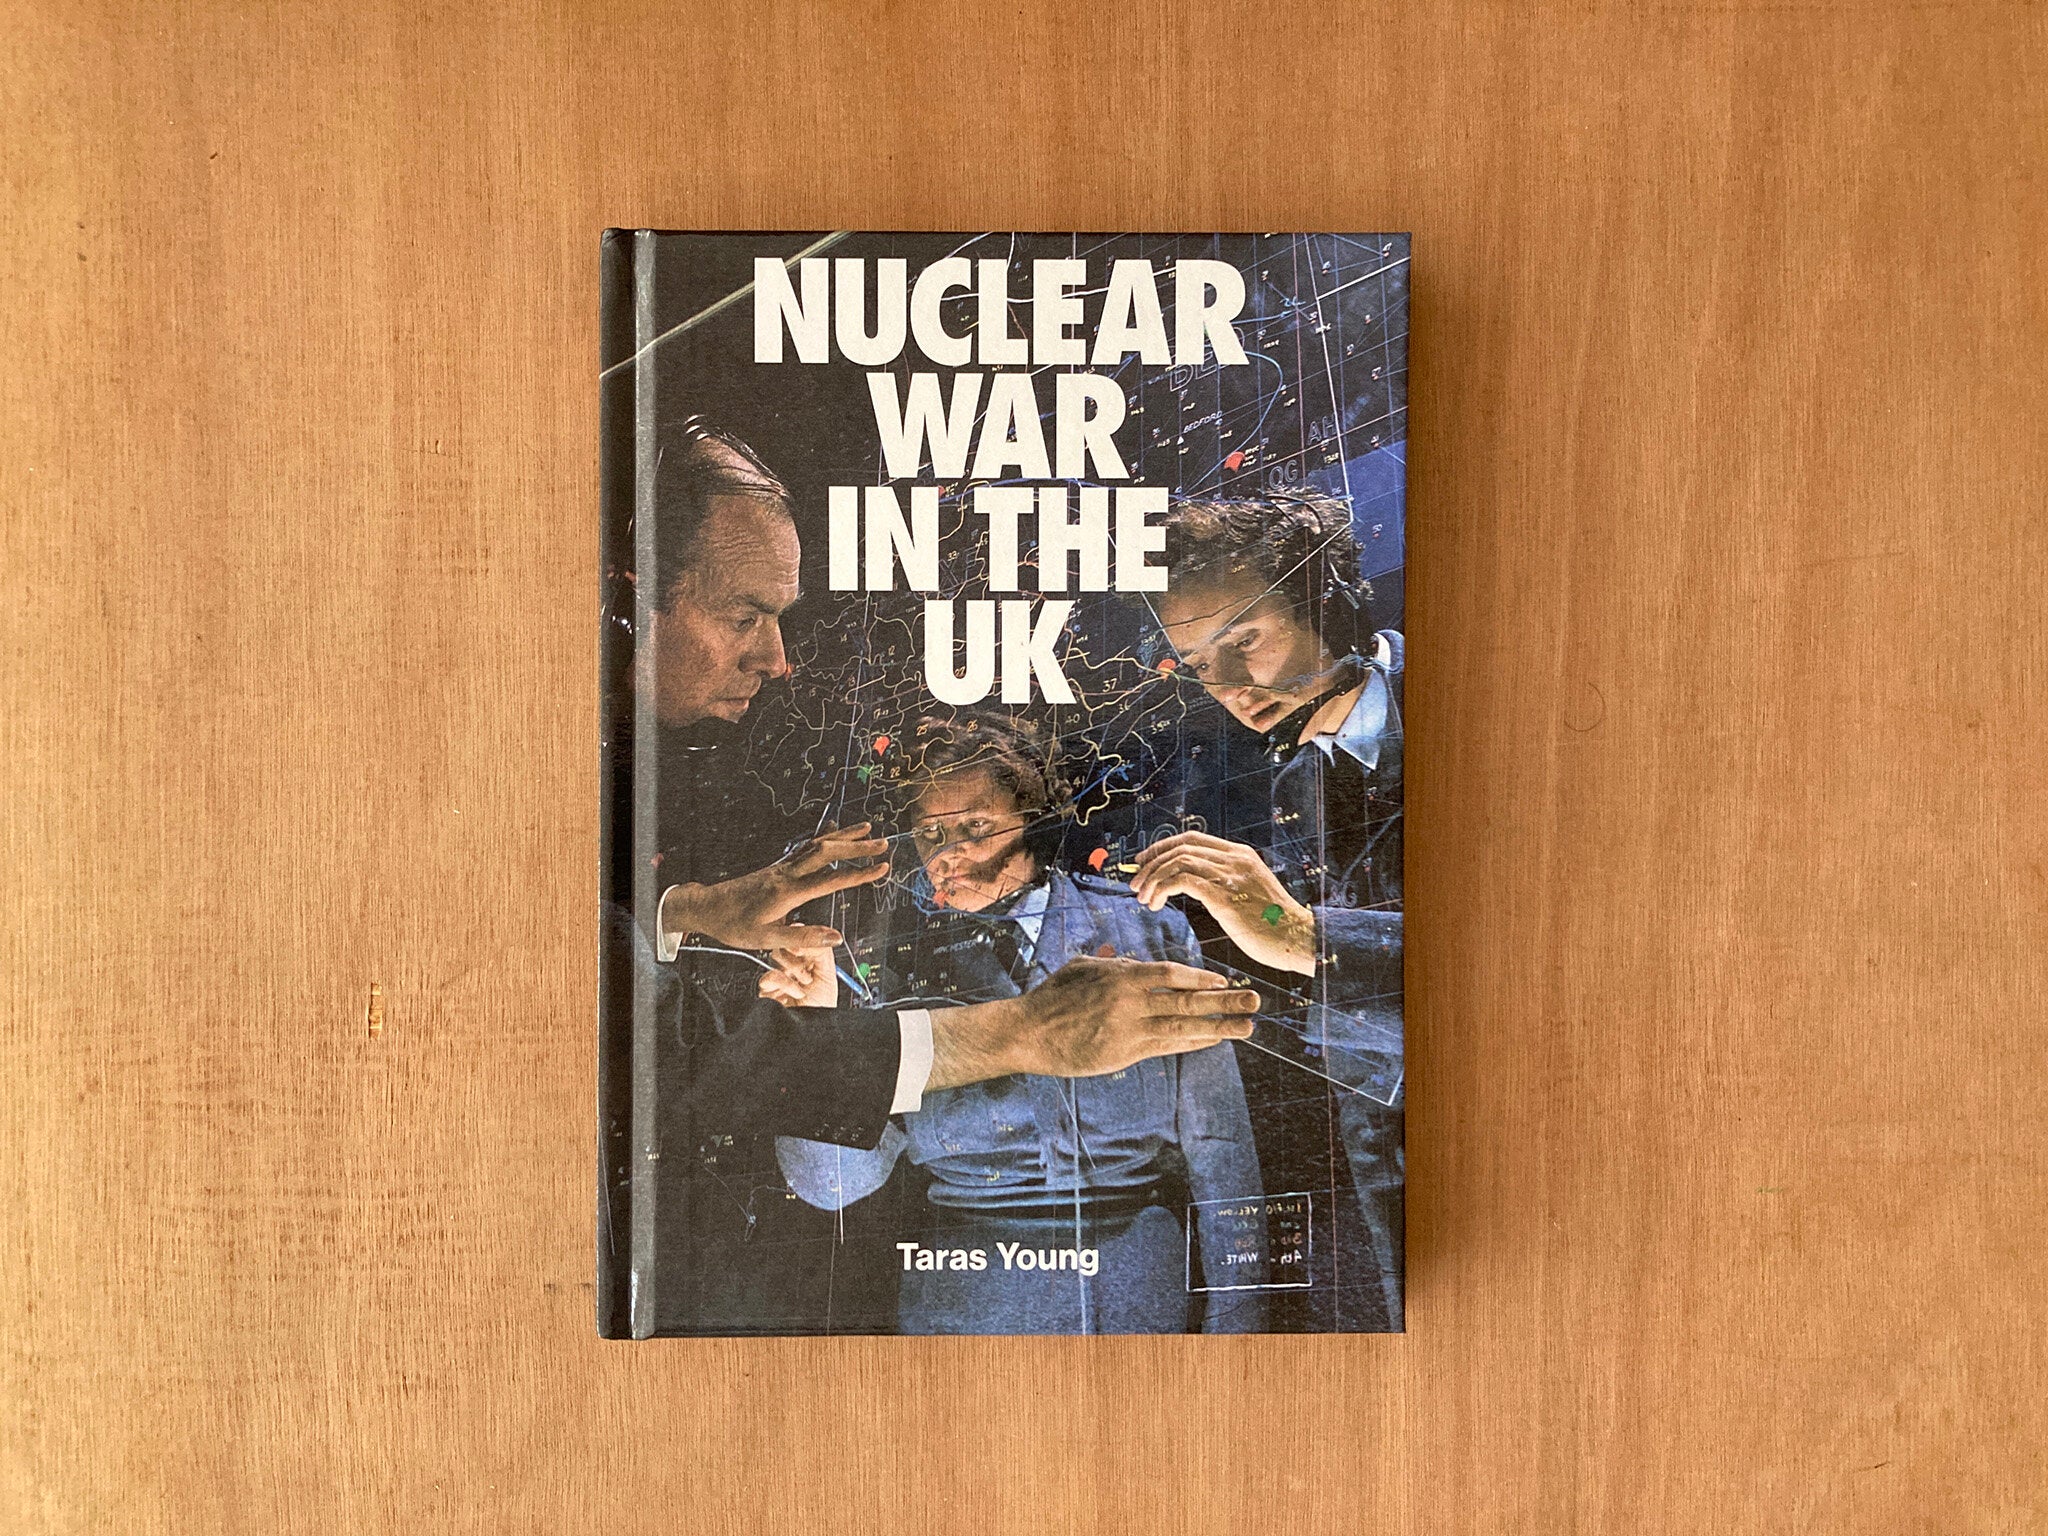 NUCLEAR WAR IN THE UK by Taras Young